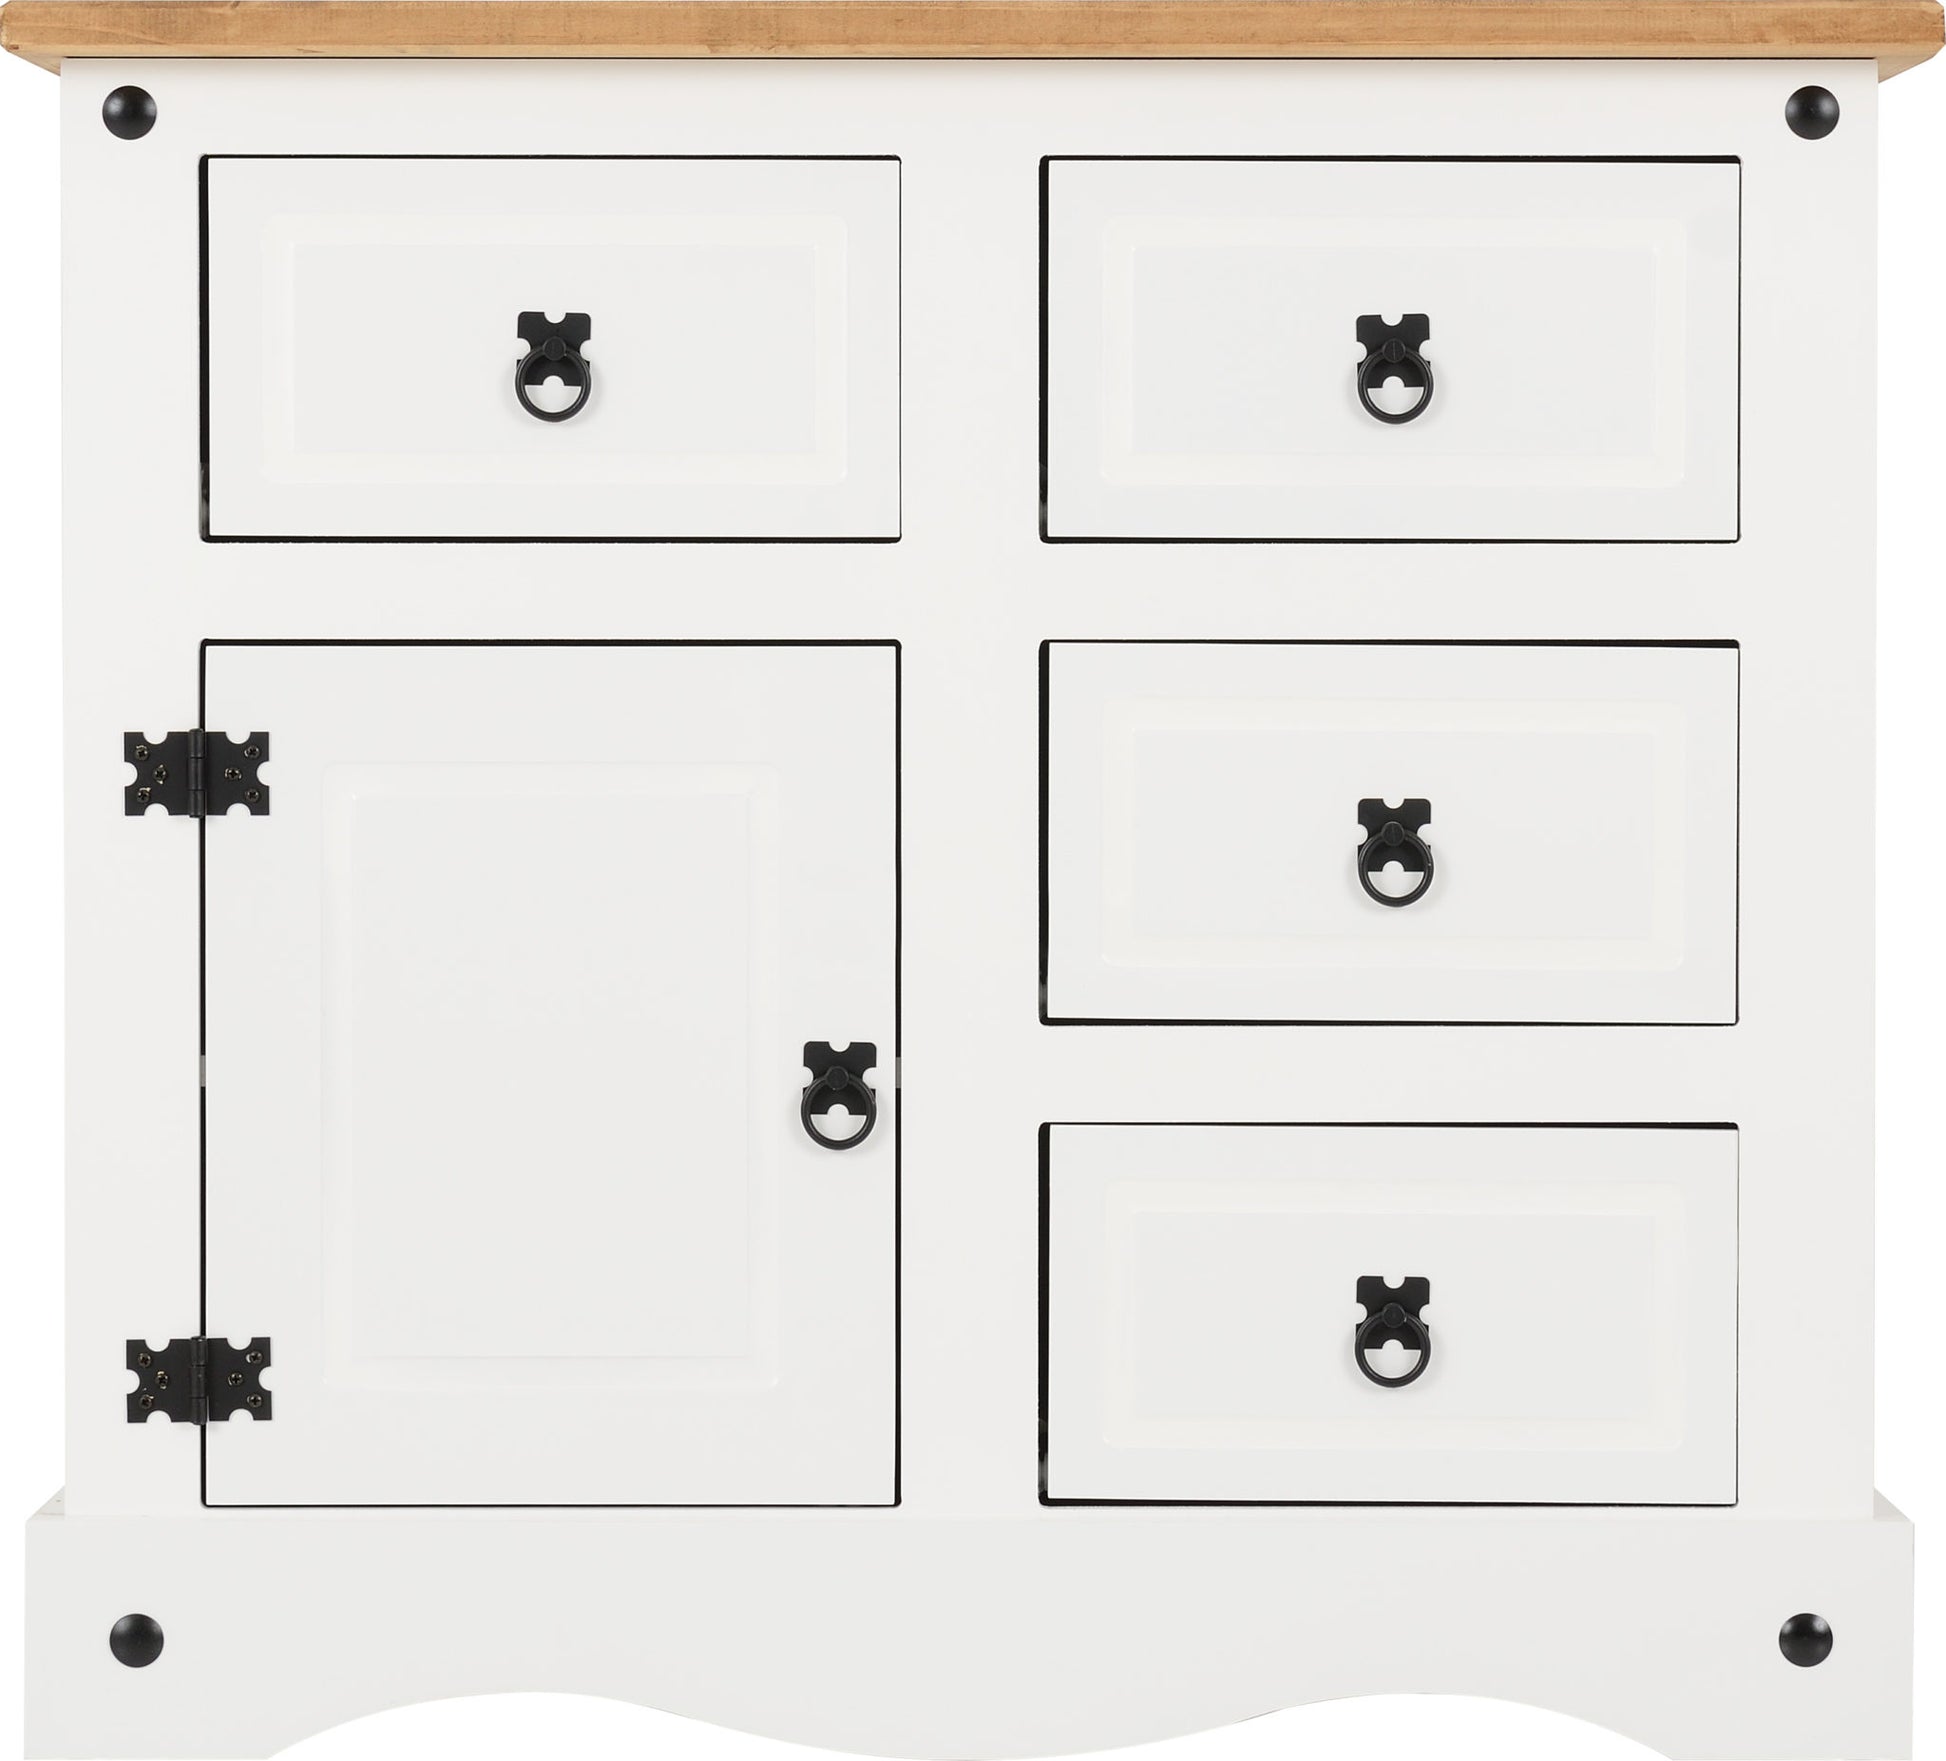 Corona 1 Door 4 Drawer Sideboard - White/Distressed Waxed Pine - The Right Buy Store